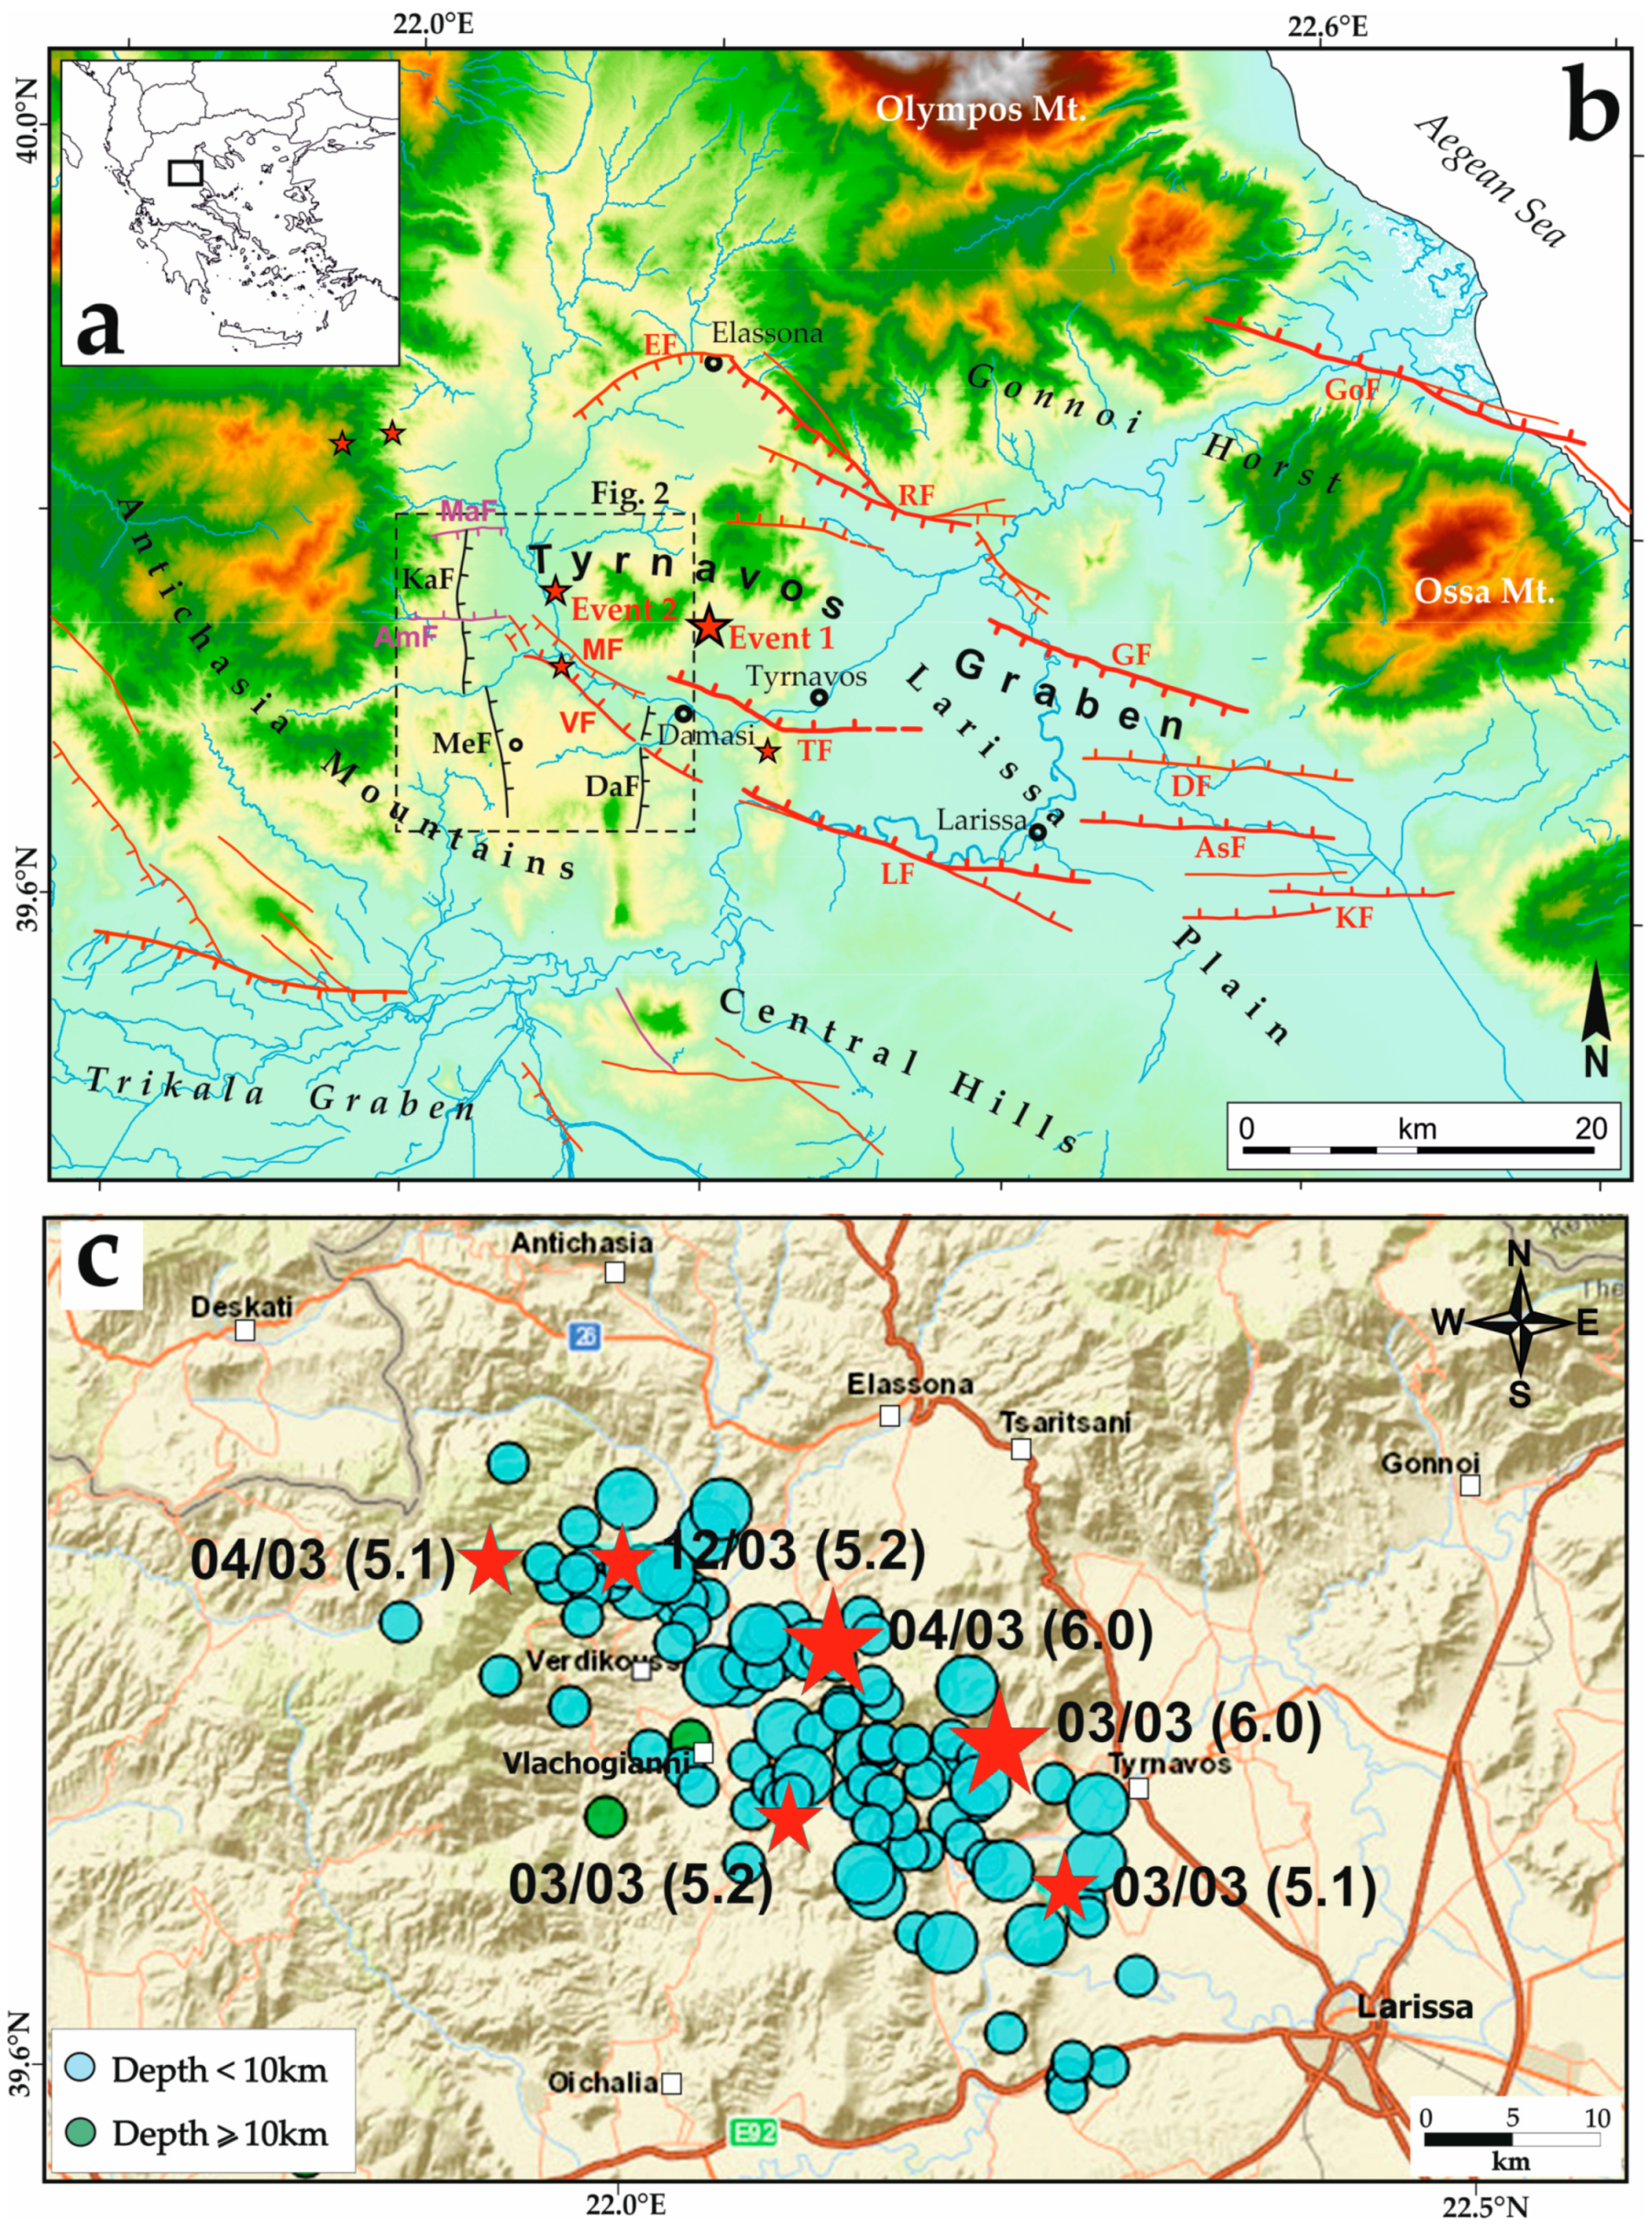 Geosciences | Free Full-Text | The March 2021 Damasi Earthquake Sequence,  Central Greece: Reactivation Evidence across the Westward Propagating  Tyrnavos Graben